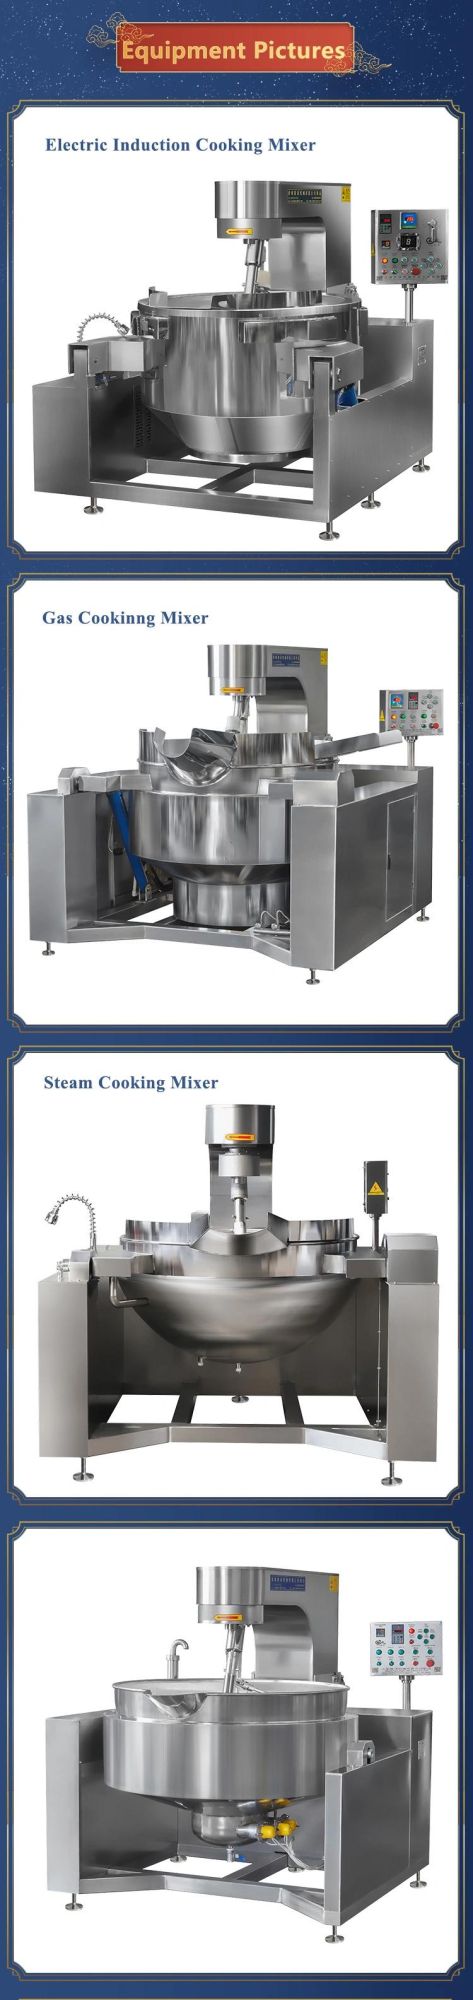 Big Capacity 600L Tilting Chili Sauce Planetary Cooking Mixer Machine for Industry